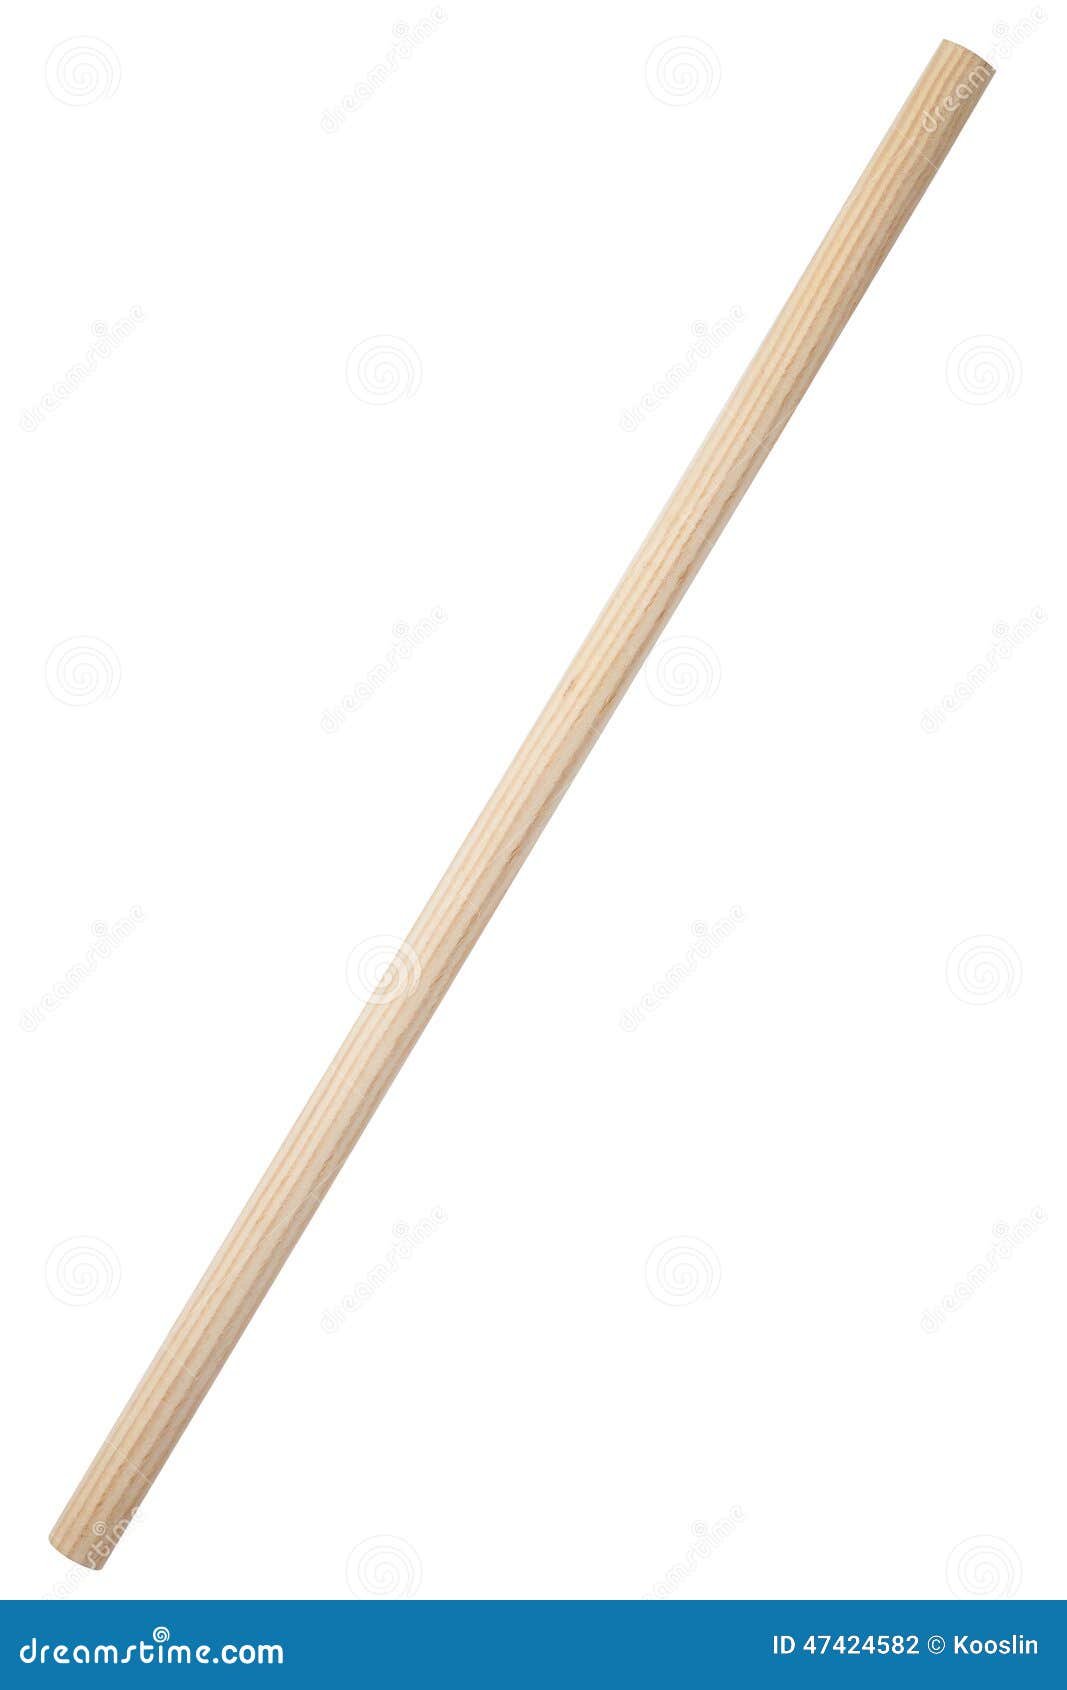 Wooden stick stock photo. Image of wood, wooden, single - 47424582